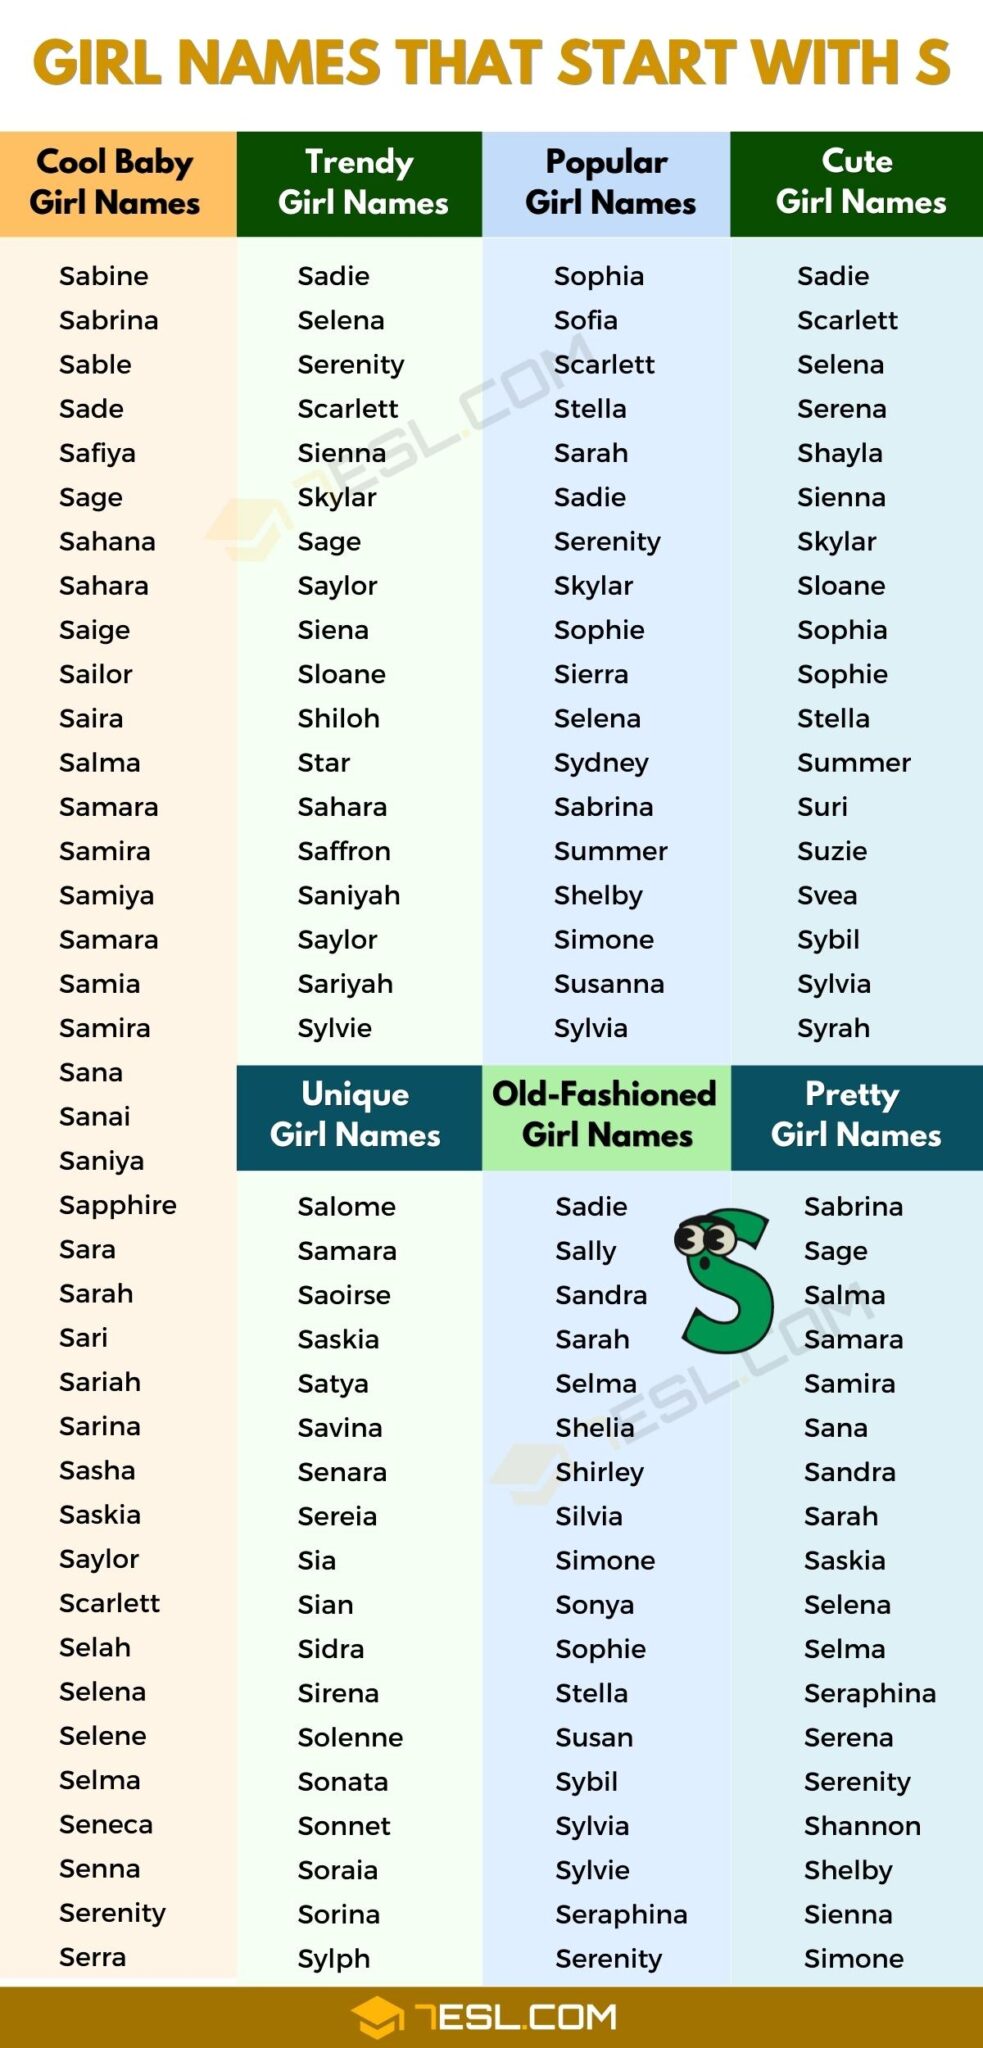 Girl Names That Start With S